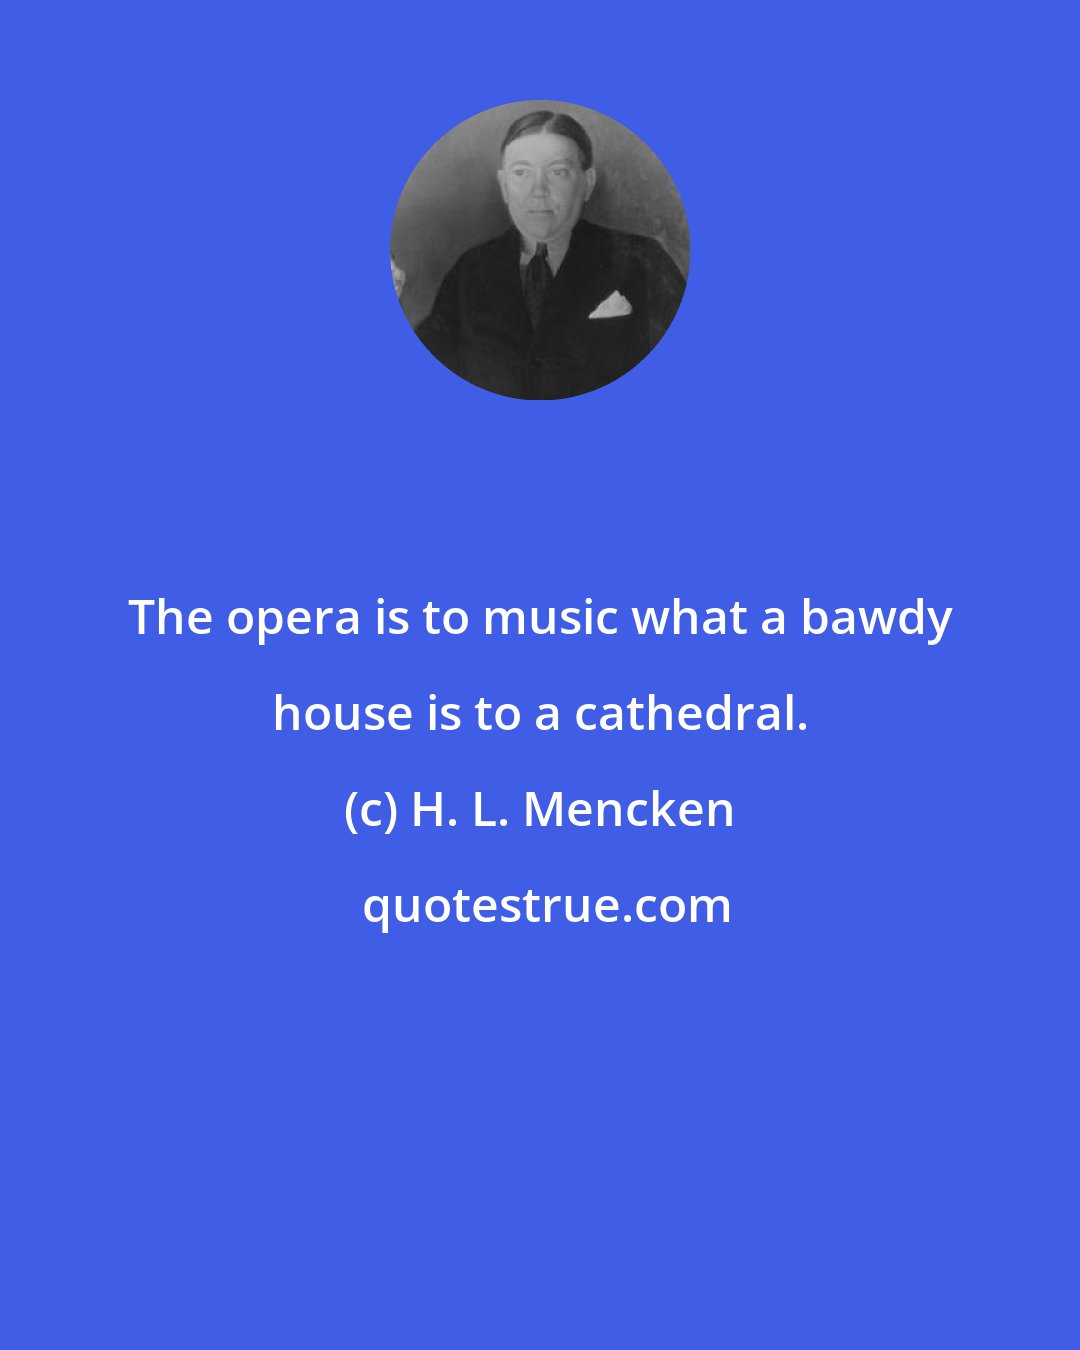 H. L. Mencken: The opera is to music what a bawdy house is to a cathedral.